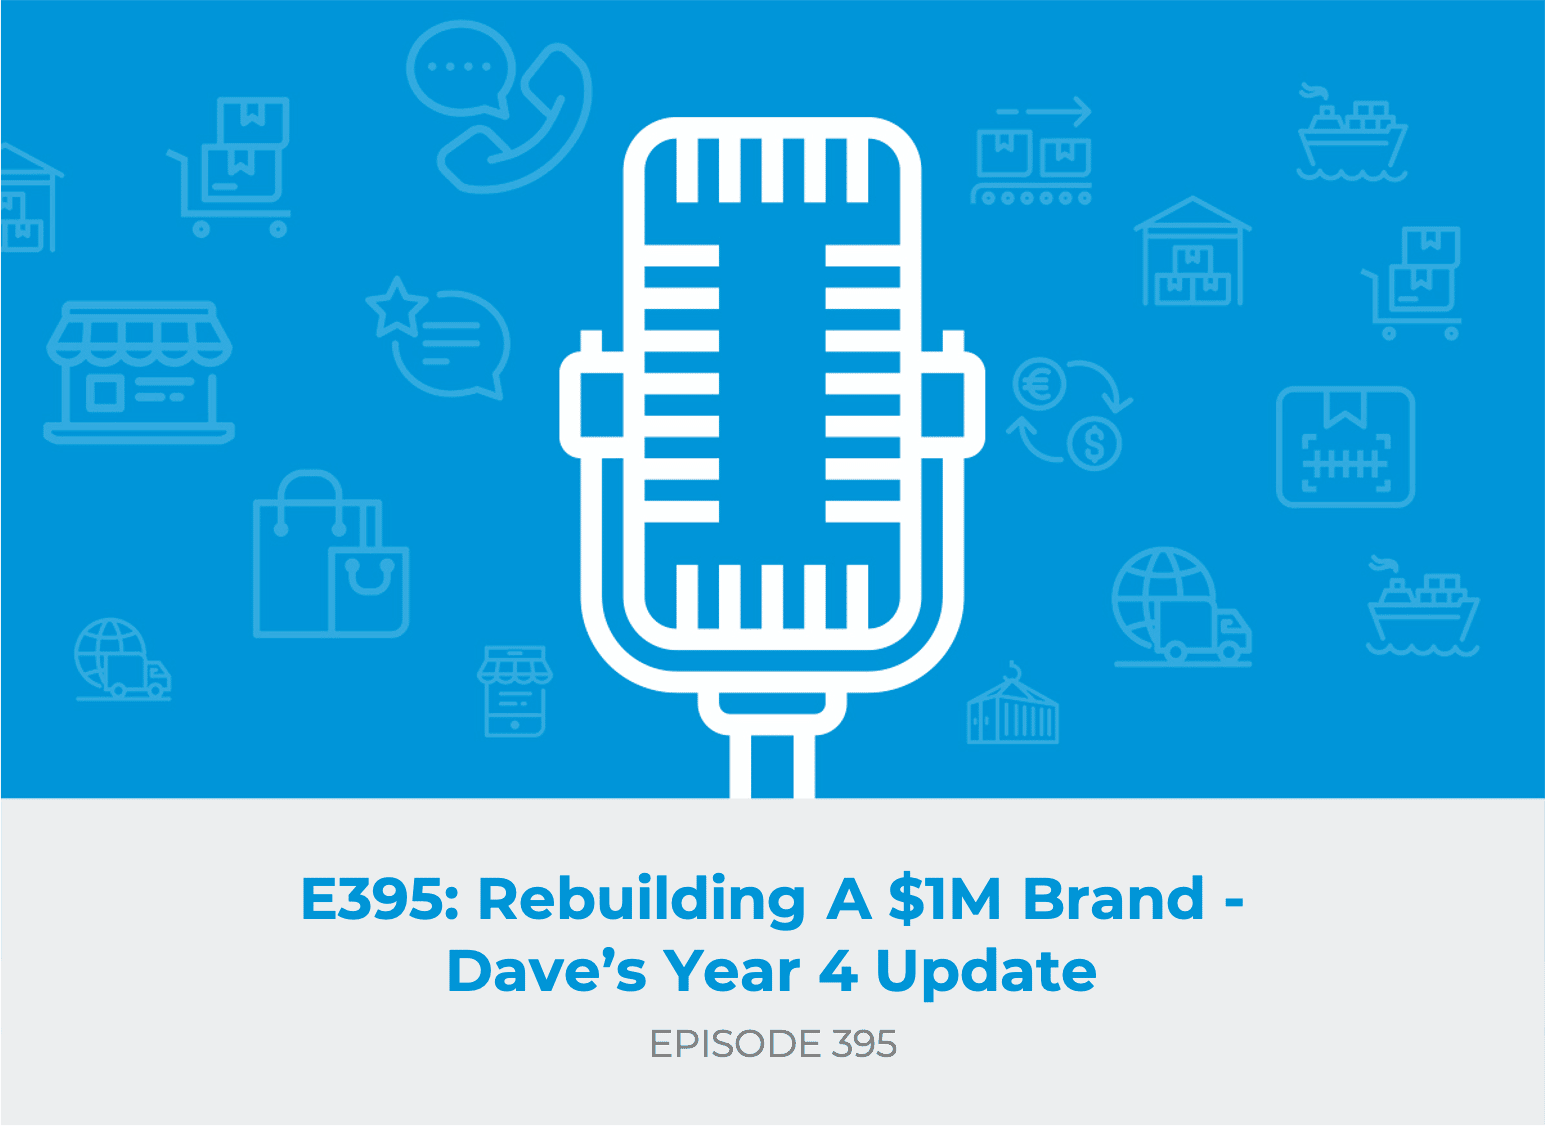 E395 - Dave's 4 Year Update